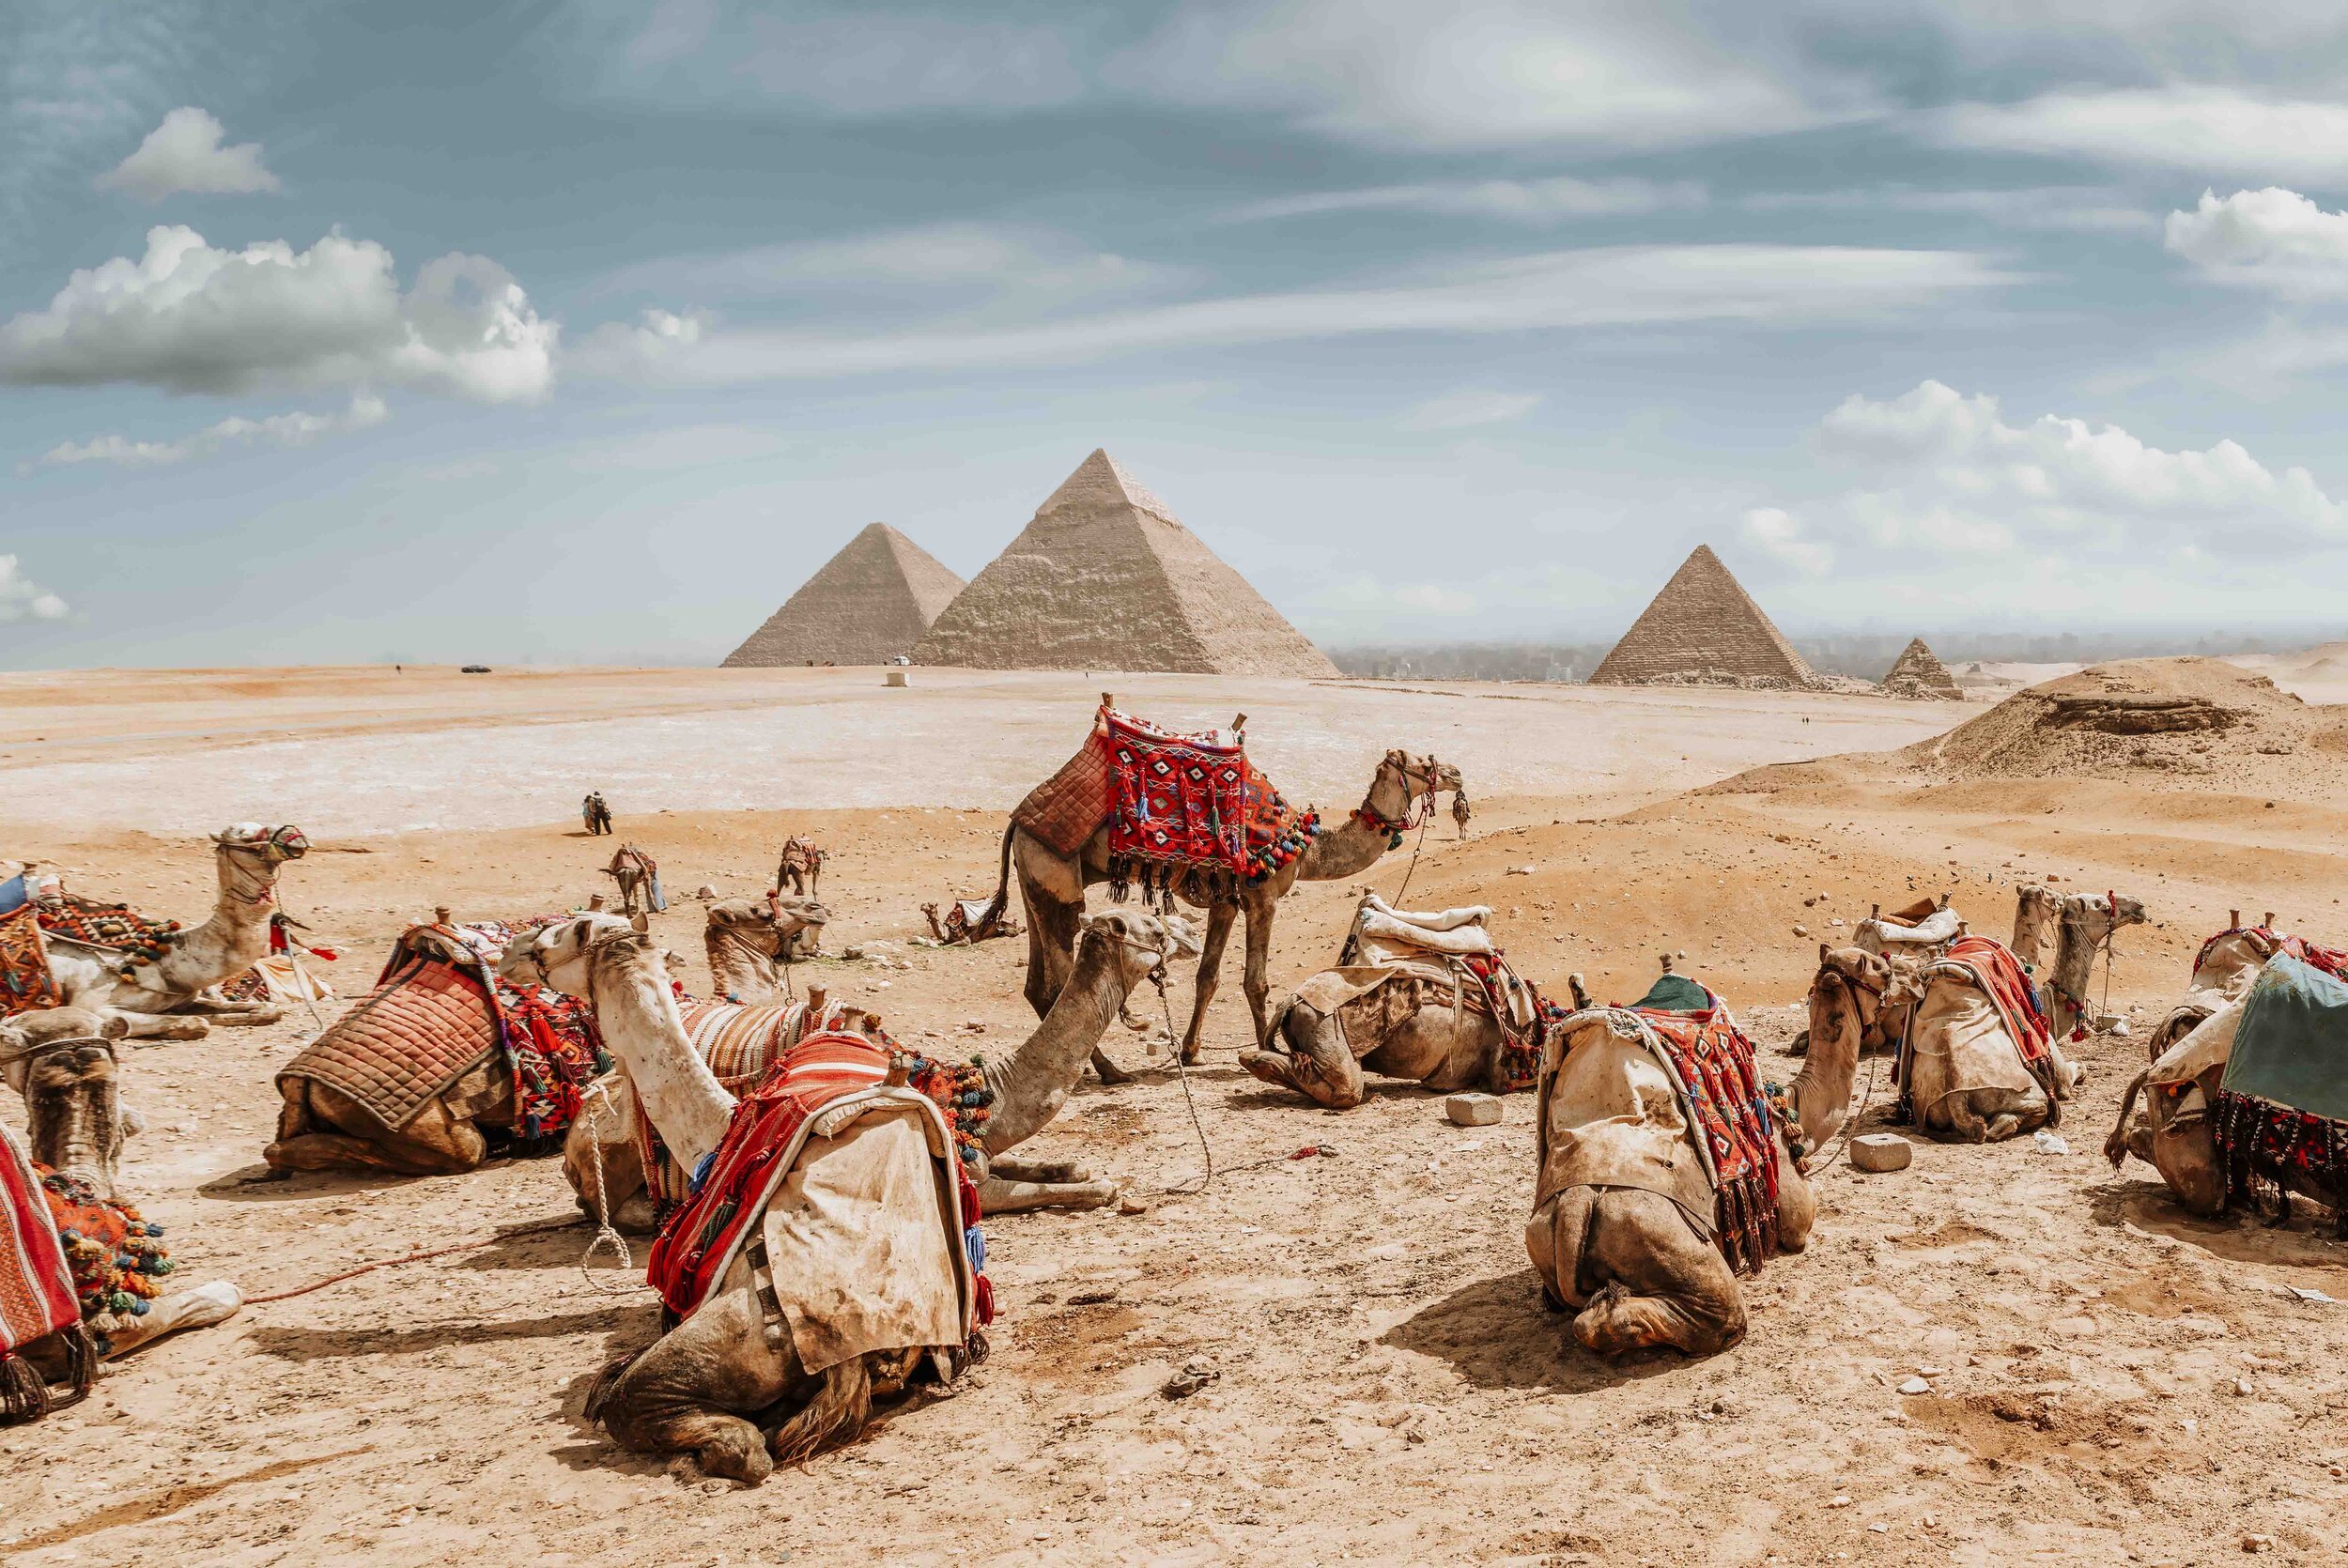 Camels sat at the base of the pyramids on a 8 Days Egypt Itinerary